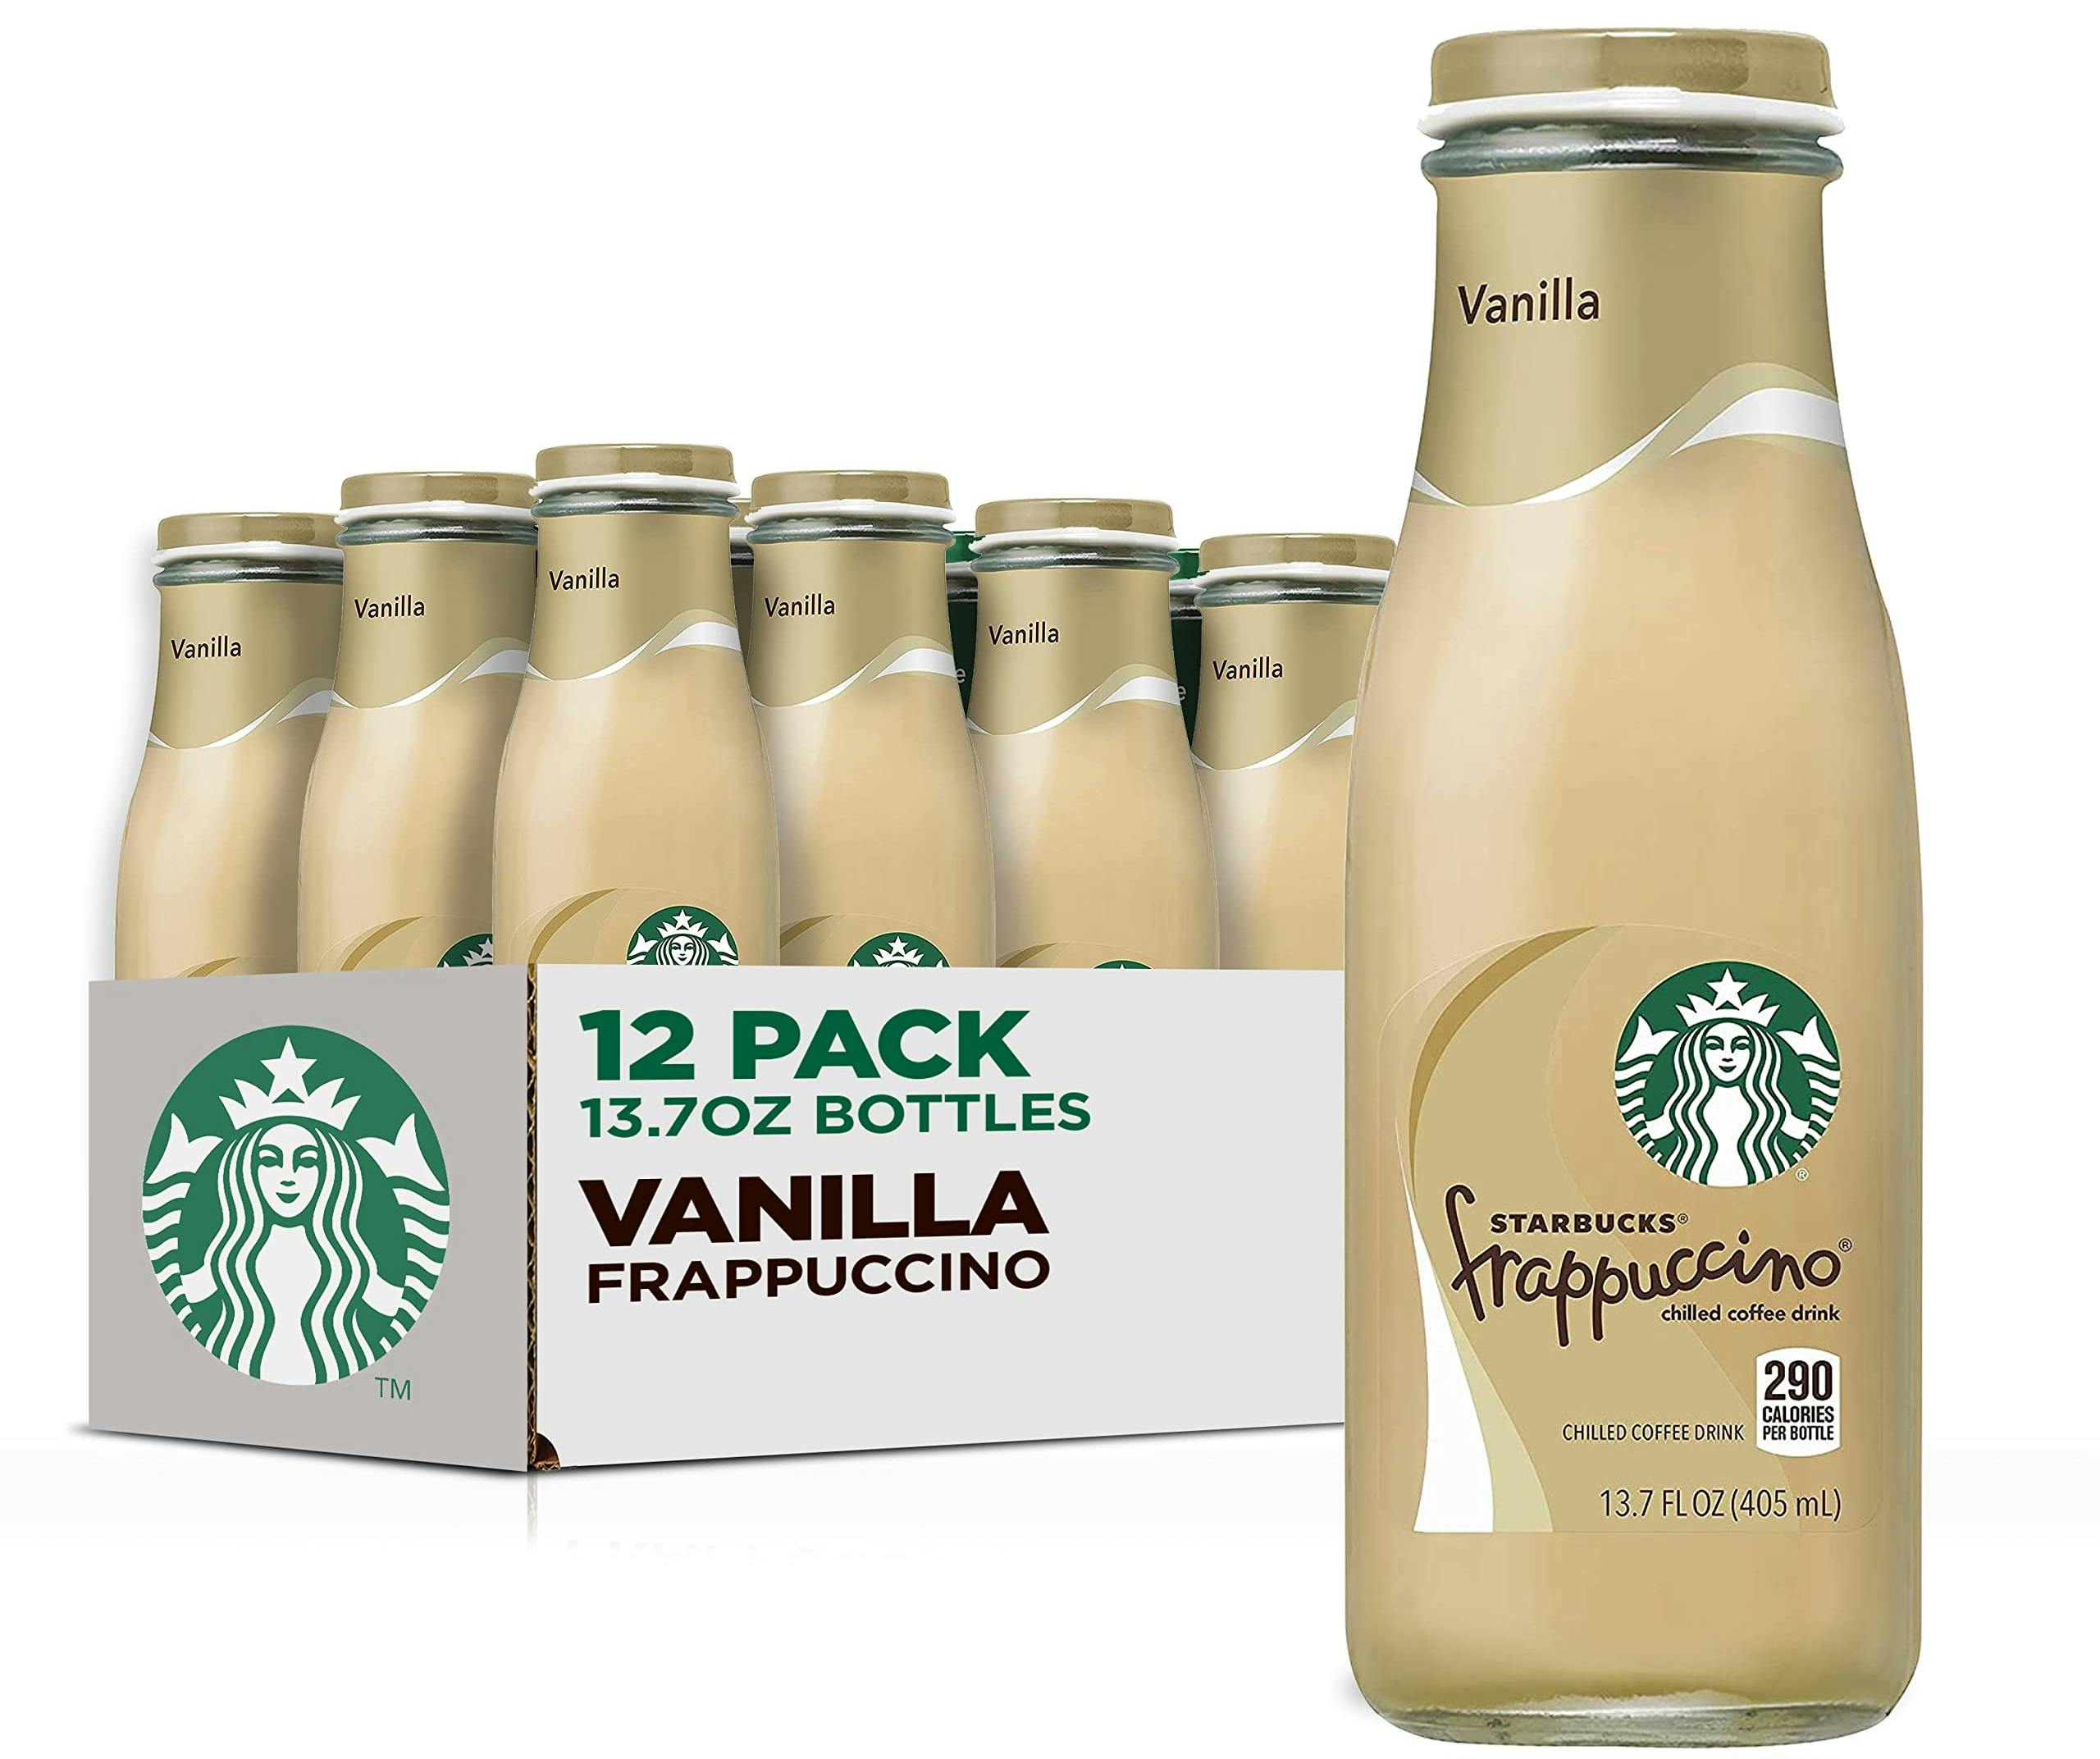 The Starbucks Vanilla Frappuccino bottles part of a recall in 2023.